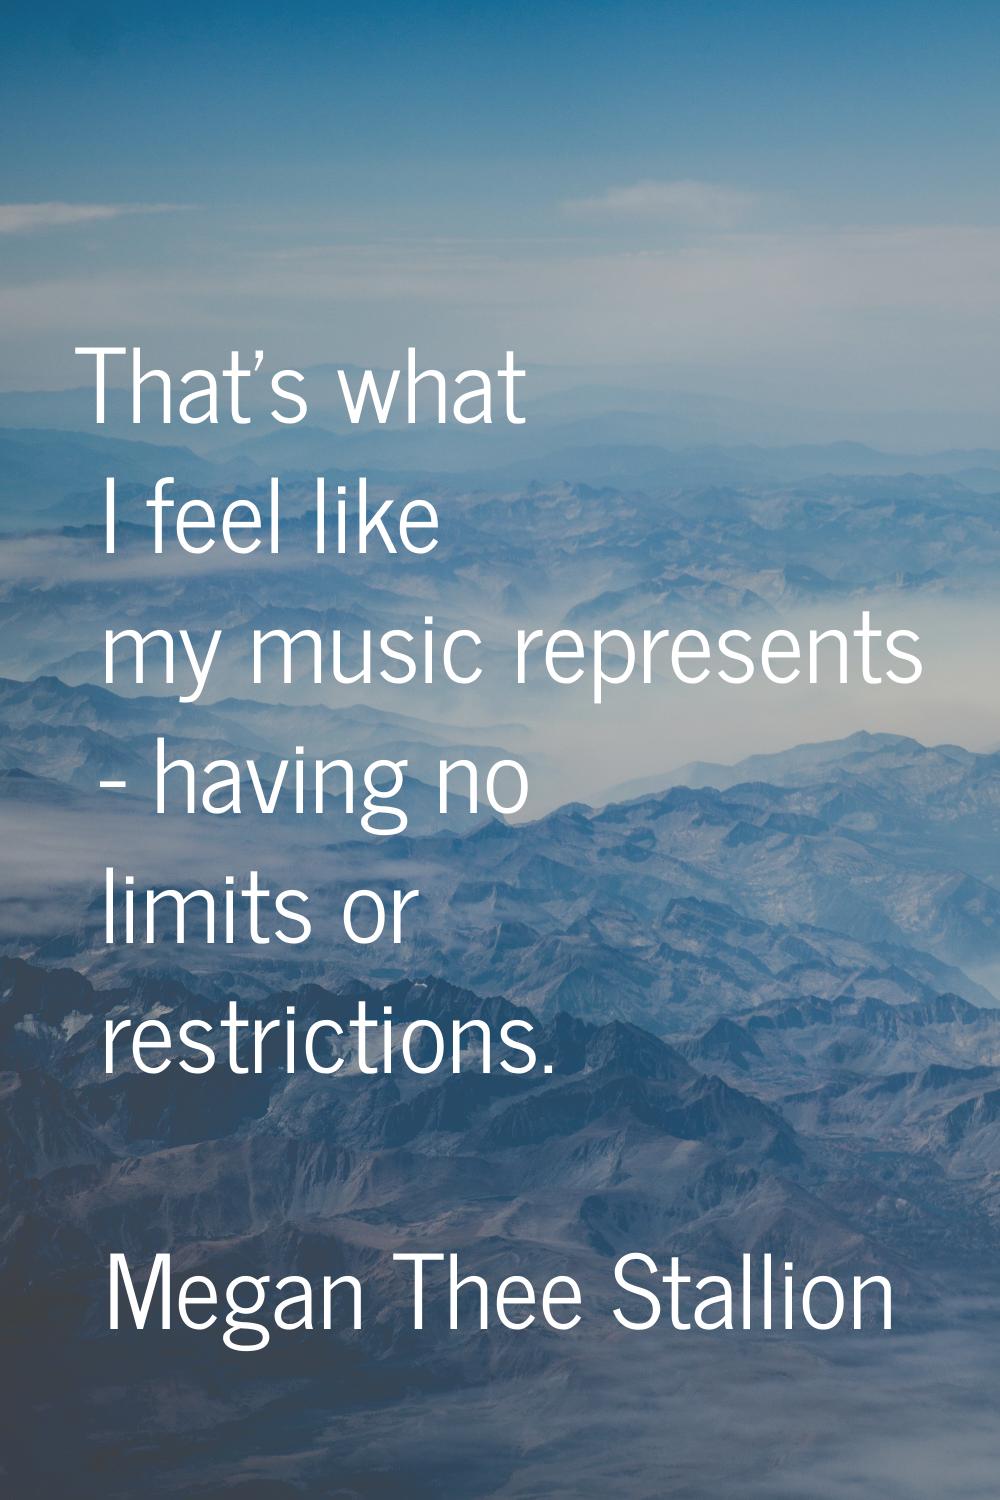 That's what I feel like my music represents - having no limits or restrictions.